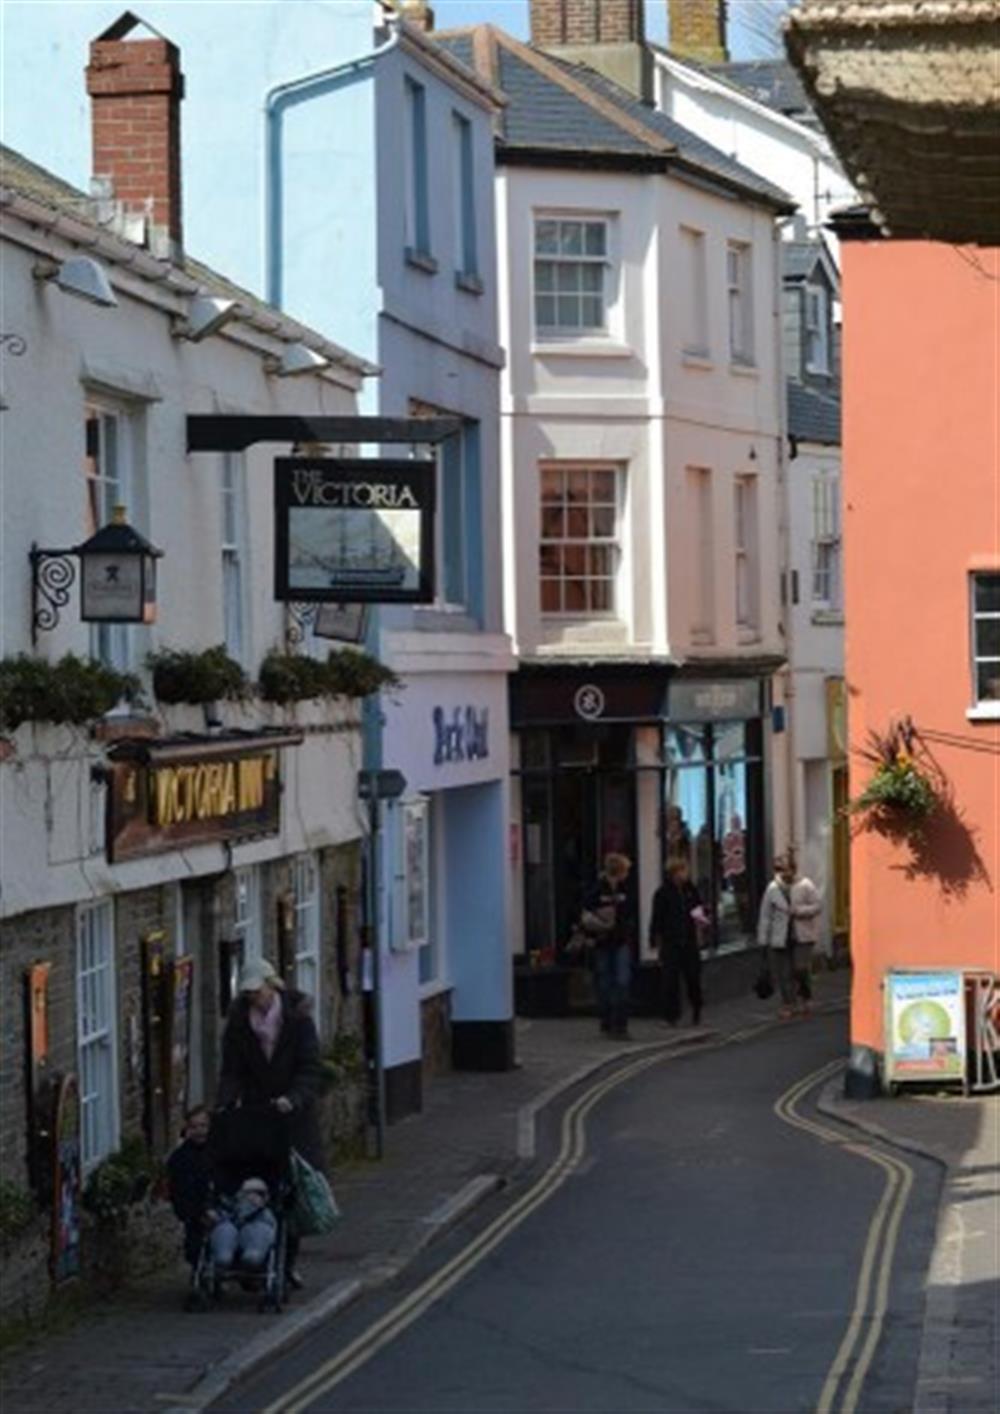 Award winning pubs, restaurants and shops all on Fore Street at 3 Waters Edge in Salcombe